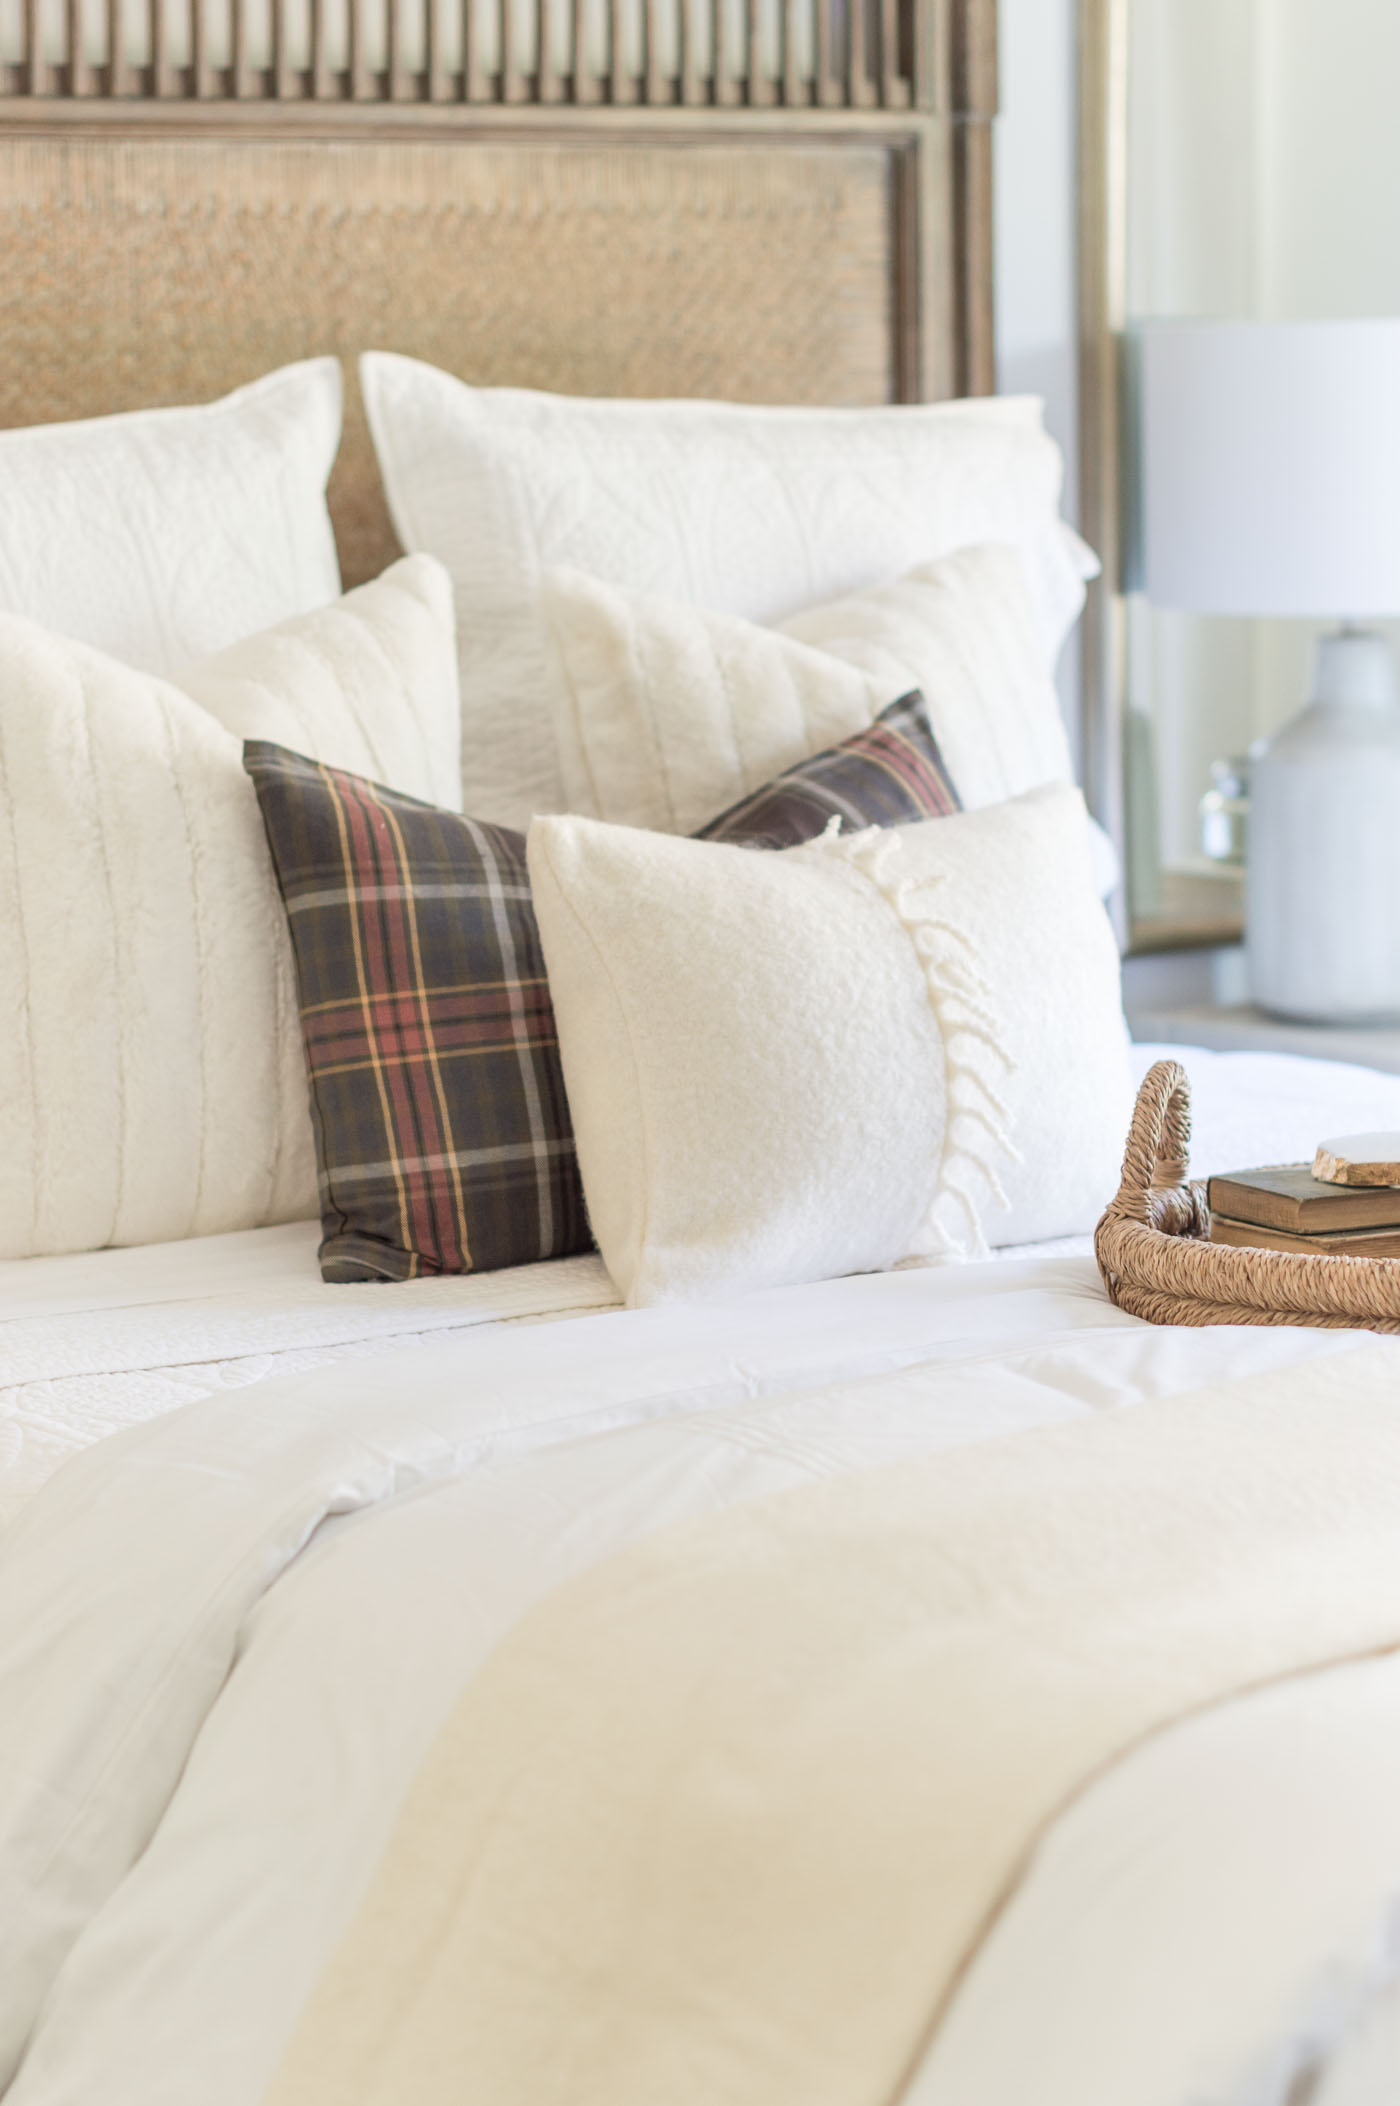 neutral bedding with pop of plaid